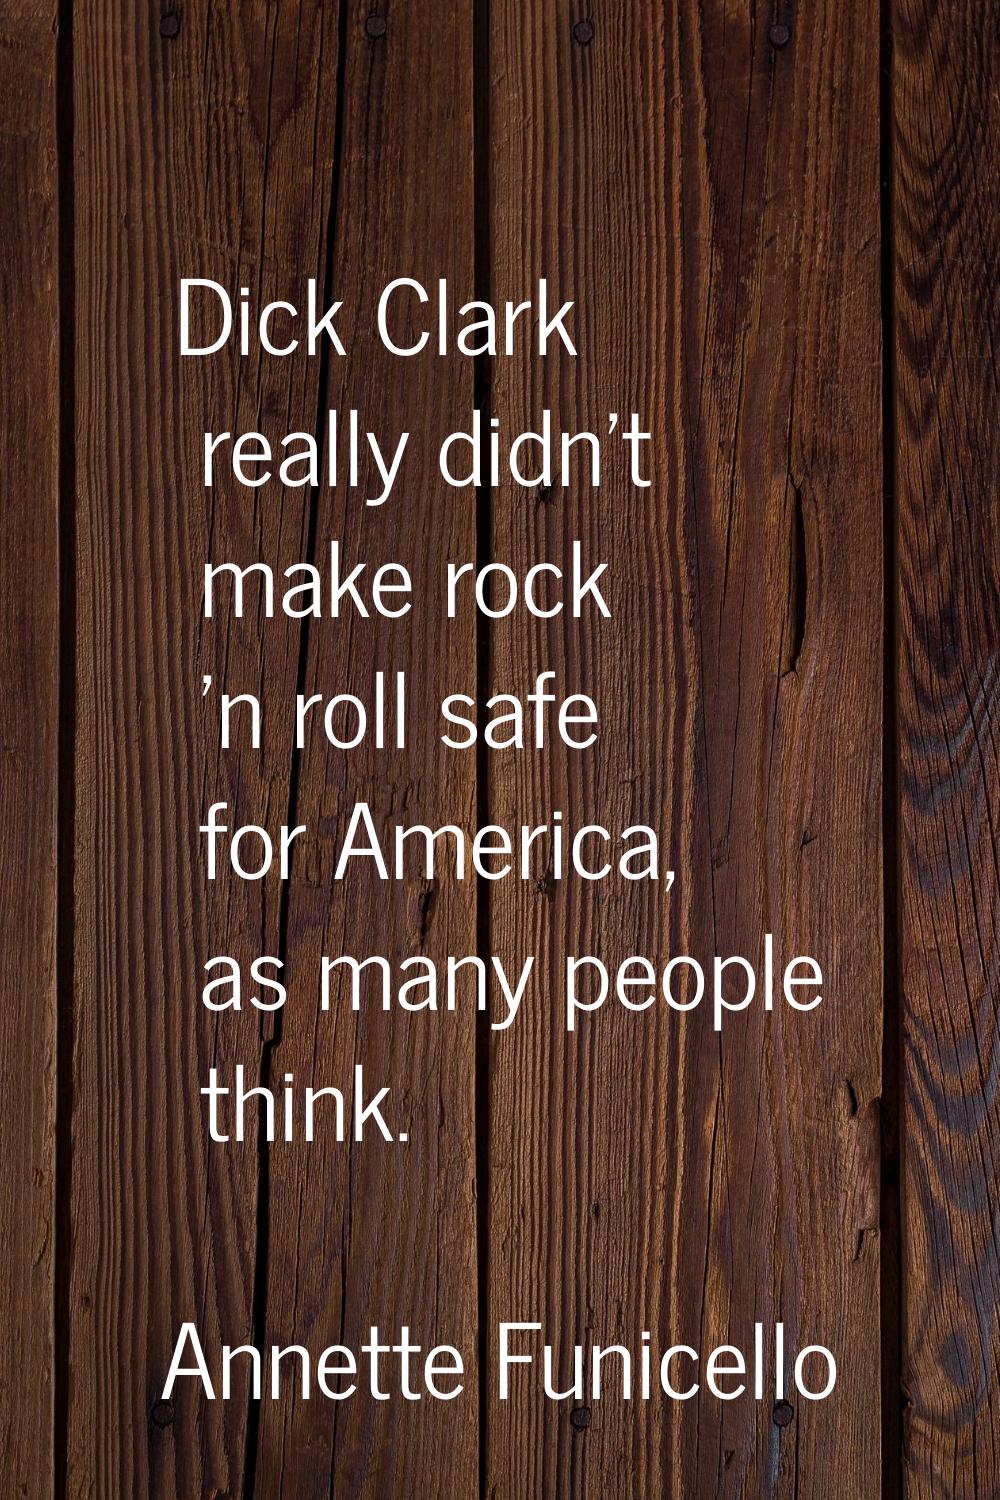 Dick Clark really didn't make rock 'n roll safe for America, as many people think.